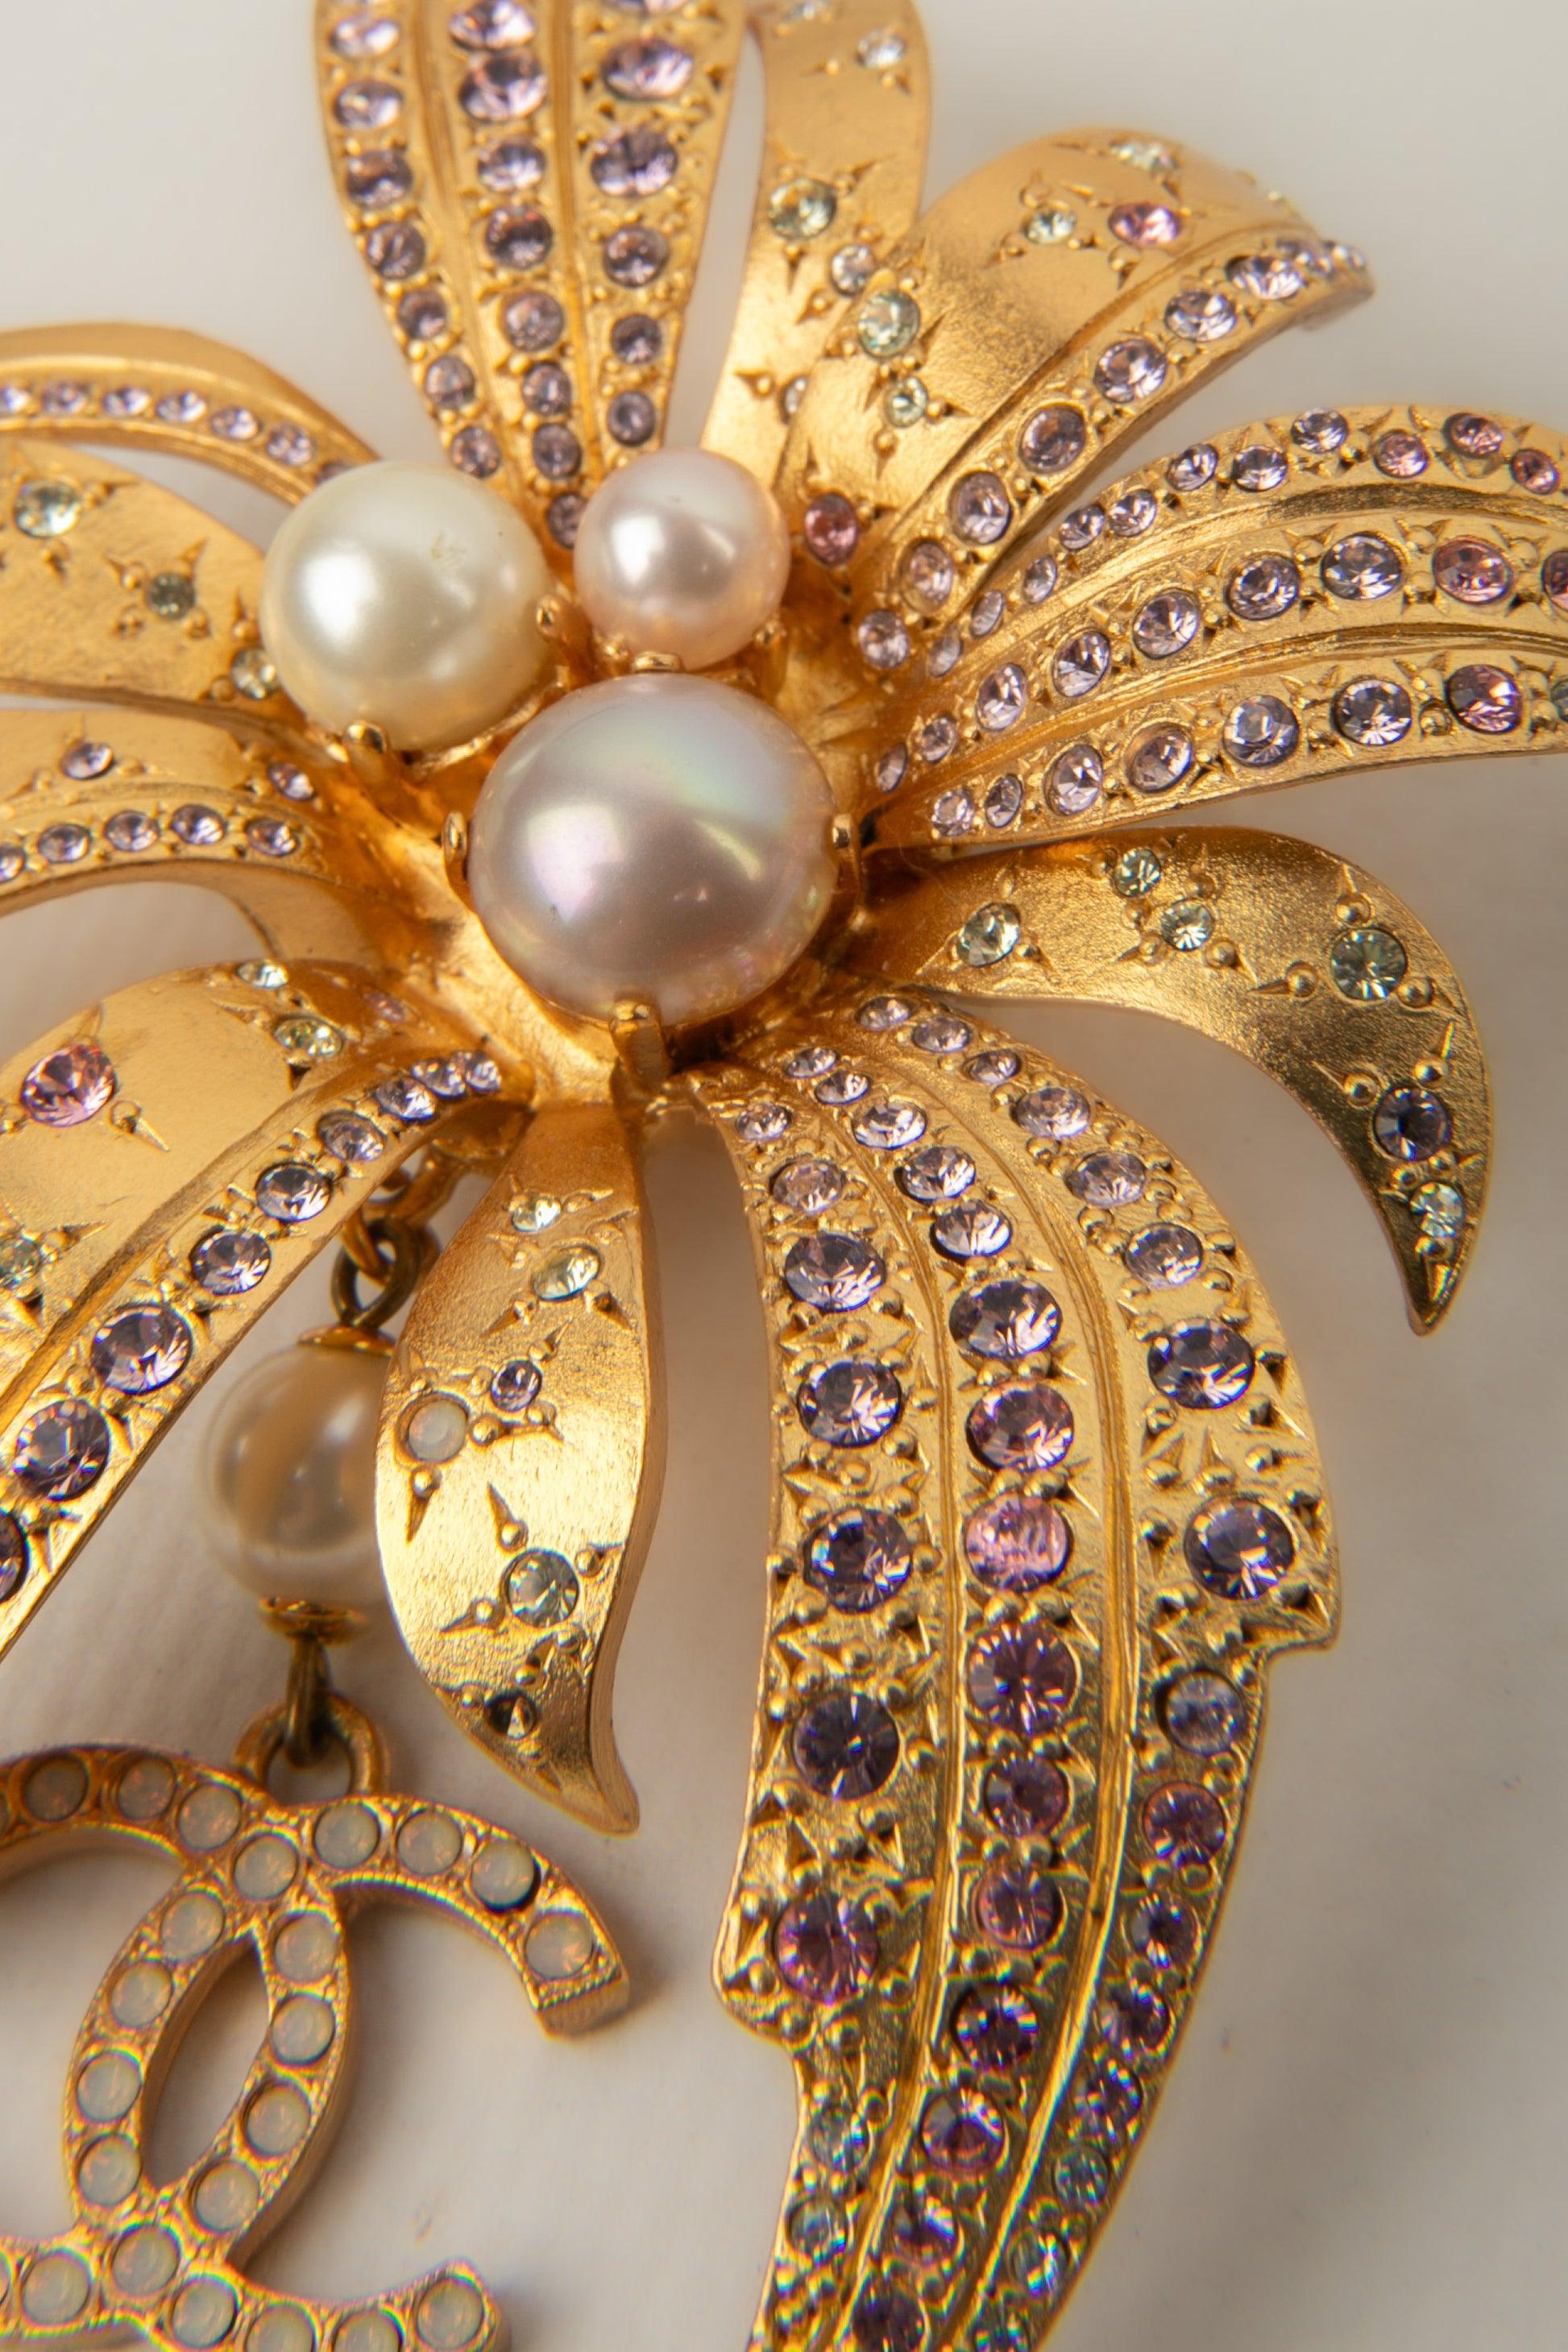 Chanel- (Made in France) Golden metal brooch ornamented with Swarovski rhinestones and costume pearls. 2002 Spring-Summer Collection.

Additional information:
Condition: Very good condition
Dimensions: Height: 9 cm
Period: 21st Century

Seller